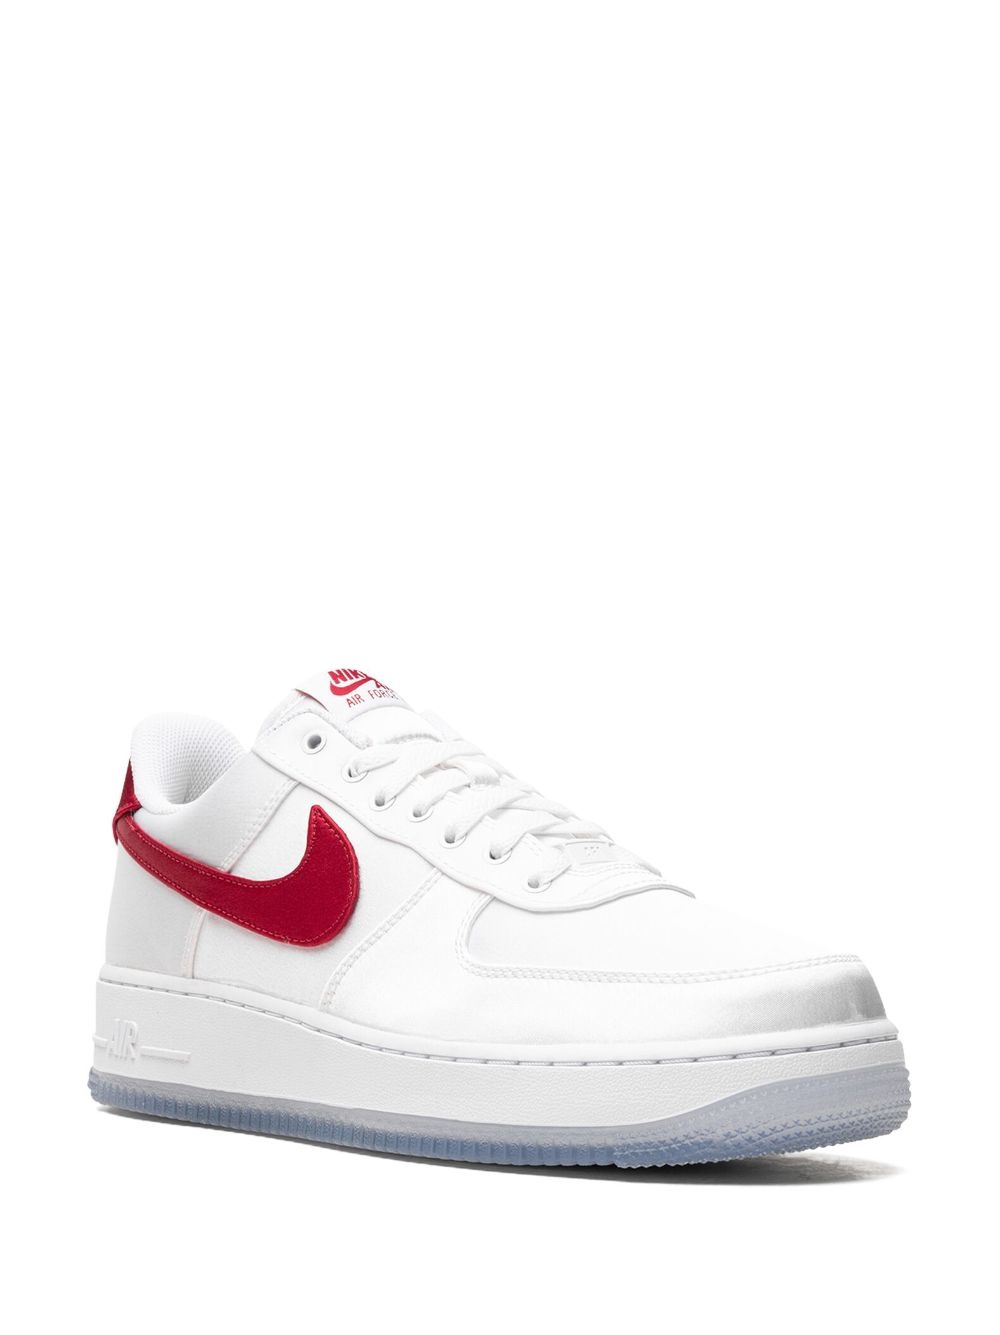 Air Force 1 Low '07 "Satin White/Varsity Red" sneakers - 2